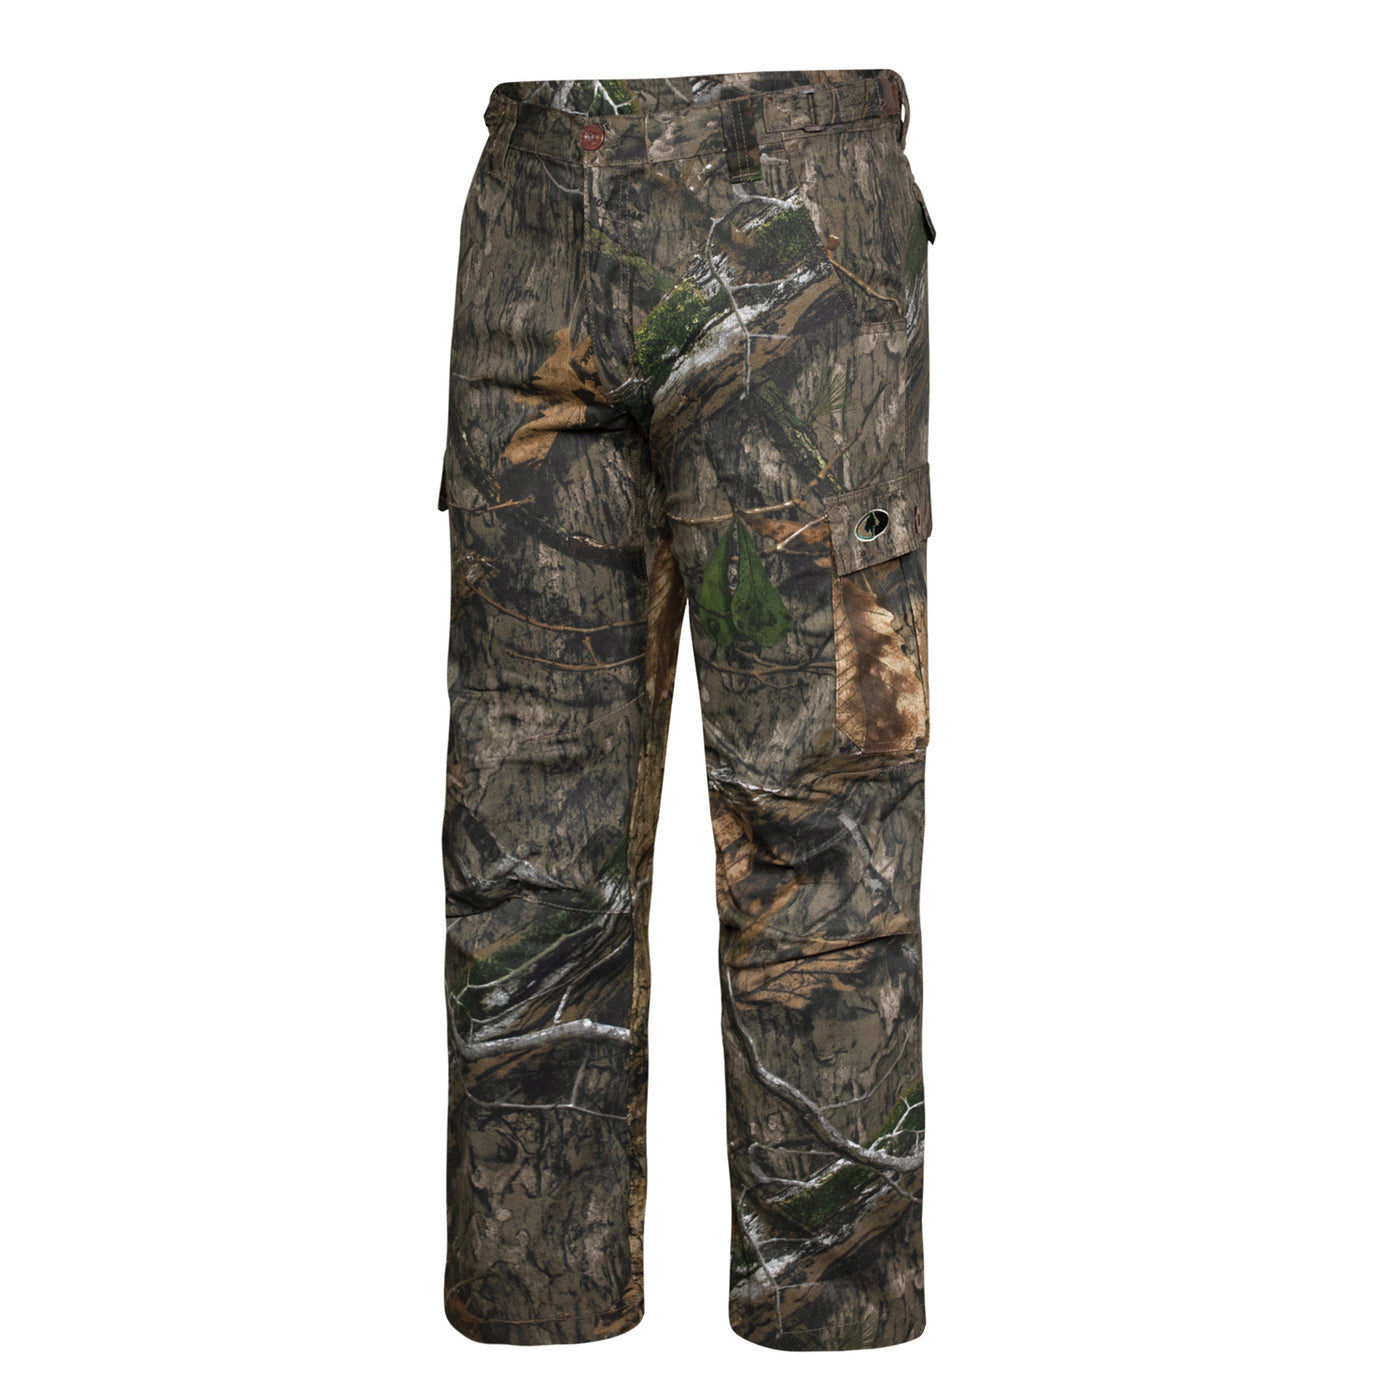 Real Tree Camo Pants Men's Size XL 40-42 X Large Cargo 6 Pockets Camouflage  New